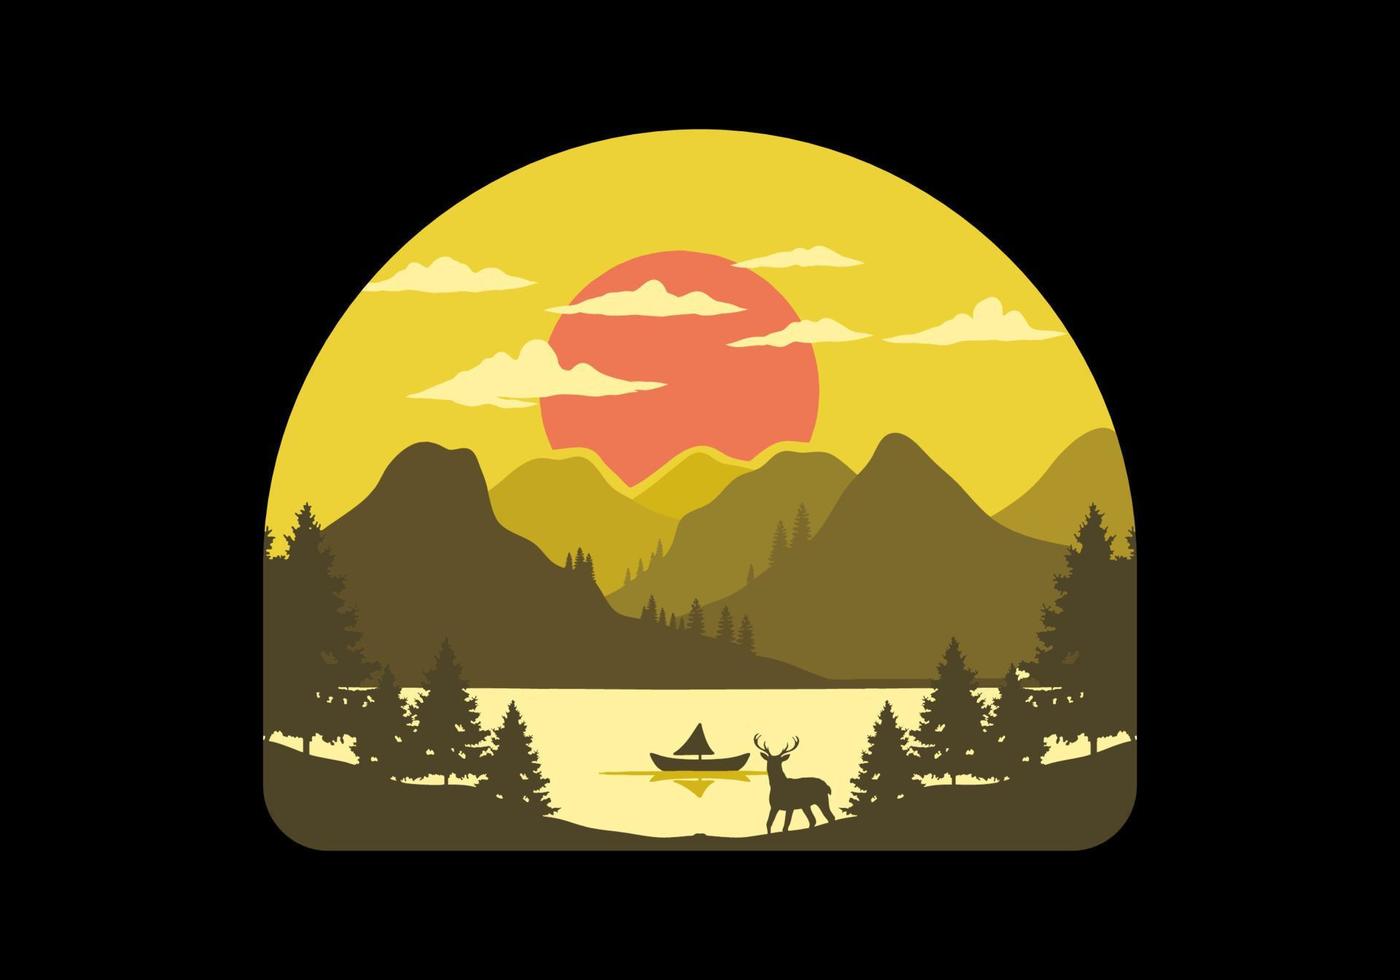 Landscape of the mountain view behind the lake with many pine trees and a deer vector